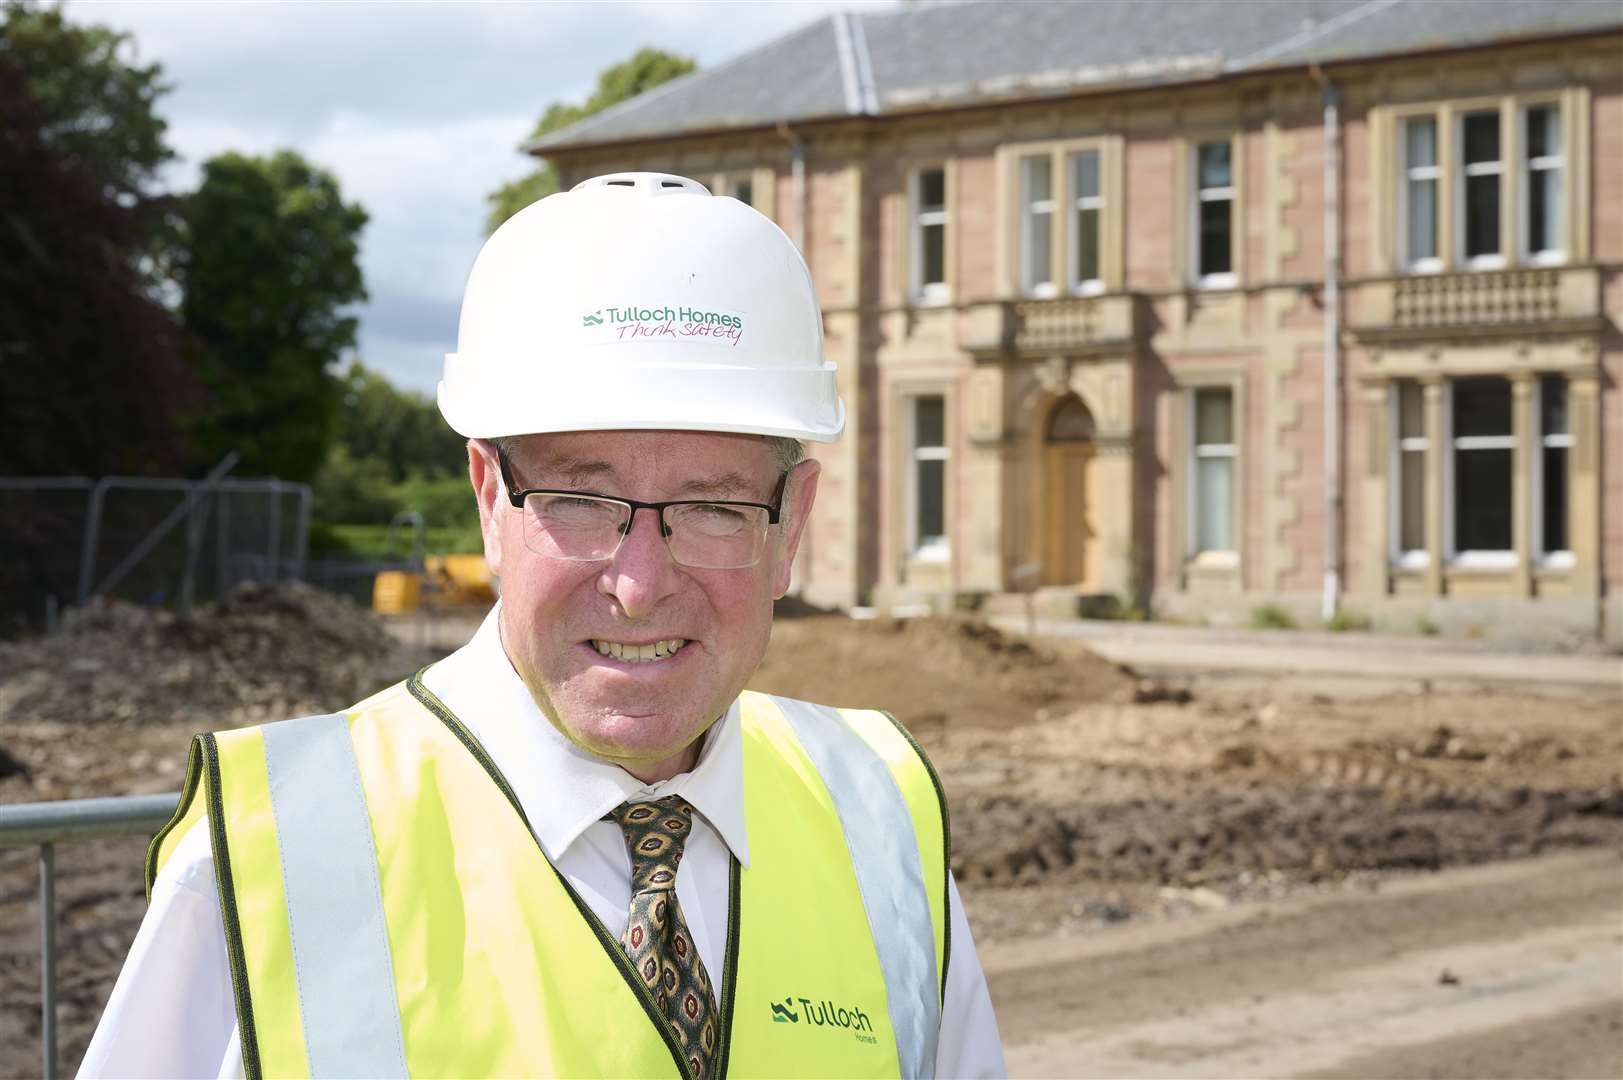 Tulloch Homes Site manager at Drummond Hill, Brian MacBride.